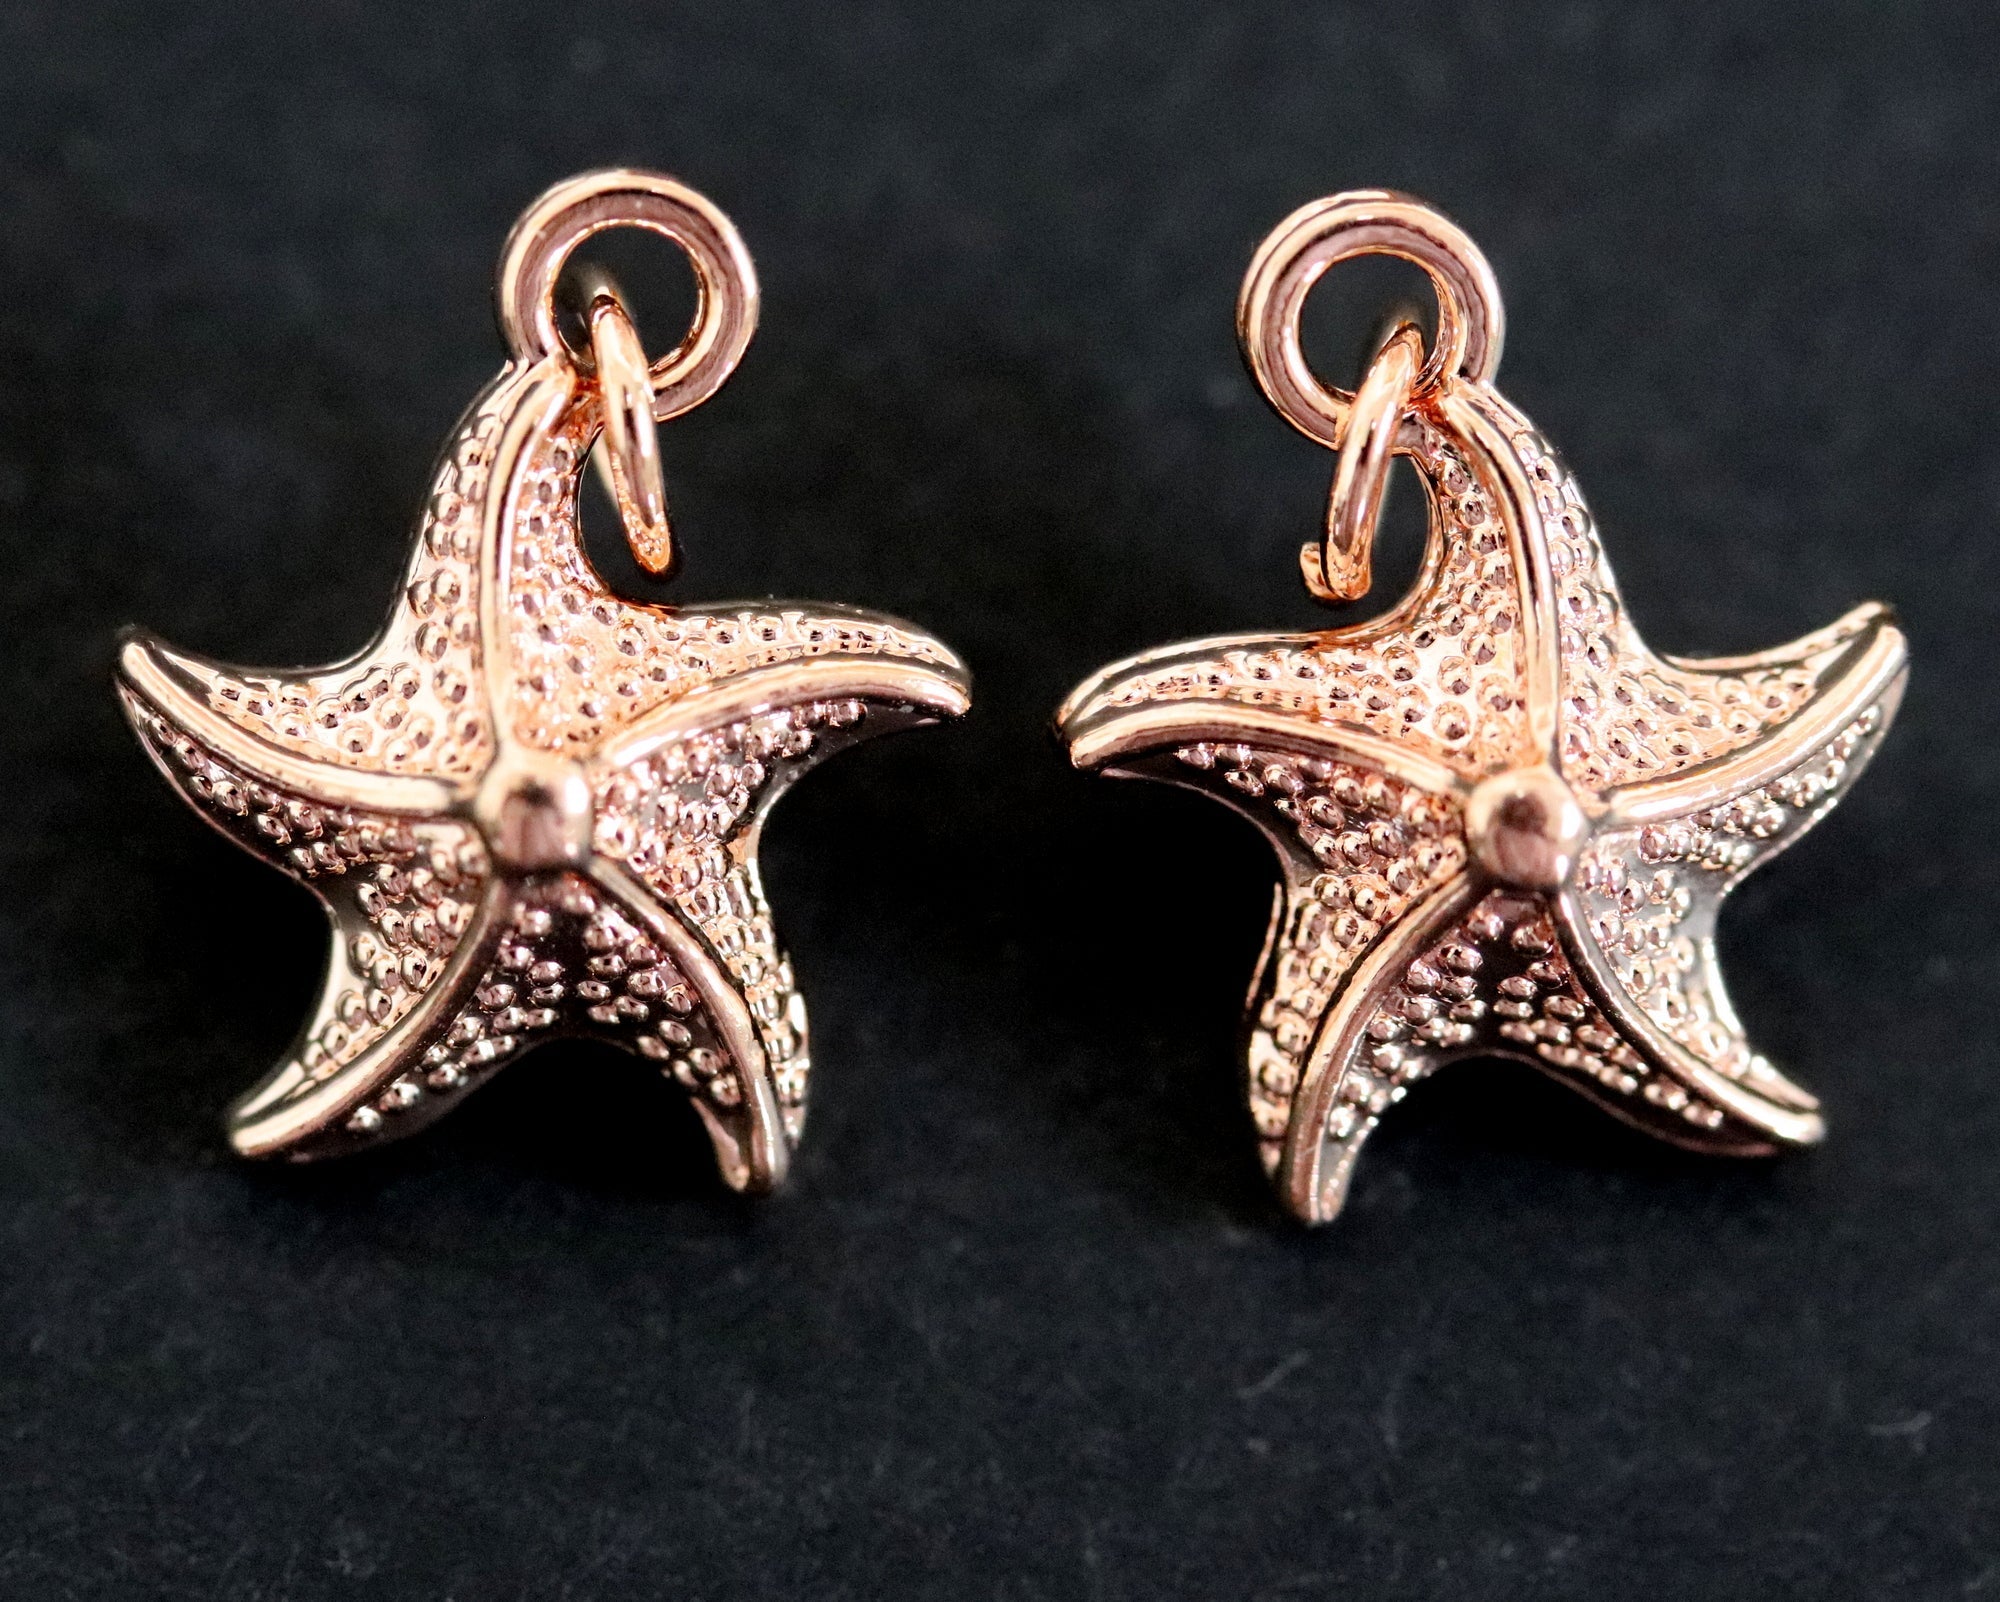 Star Fish charm 13x17mm 14K Rose Gold plated metal alloy pendant